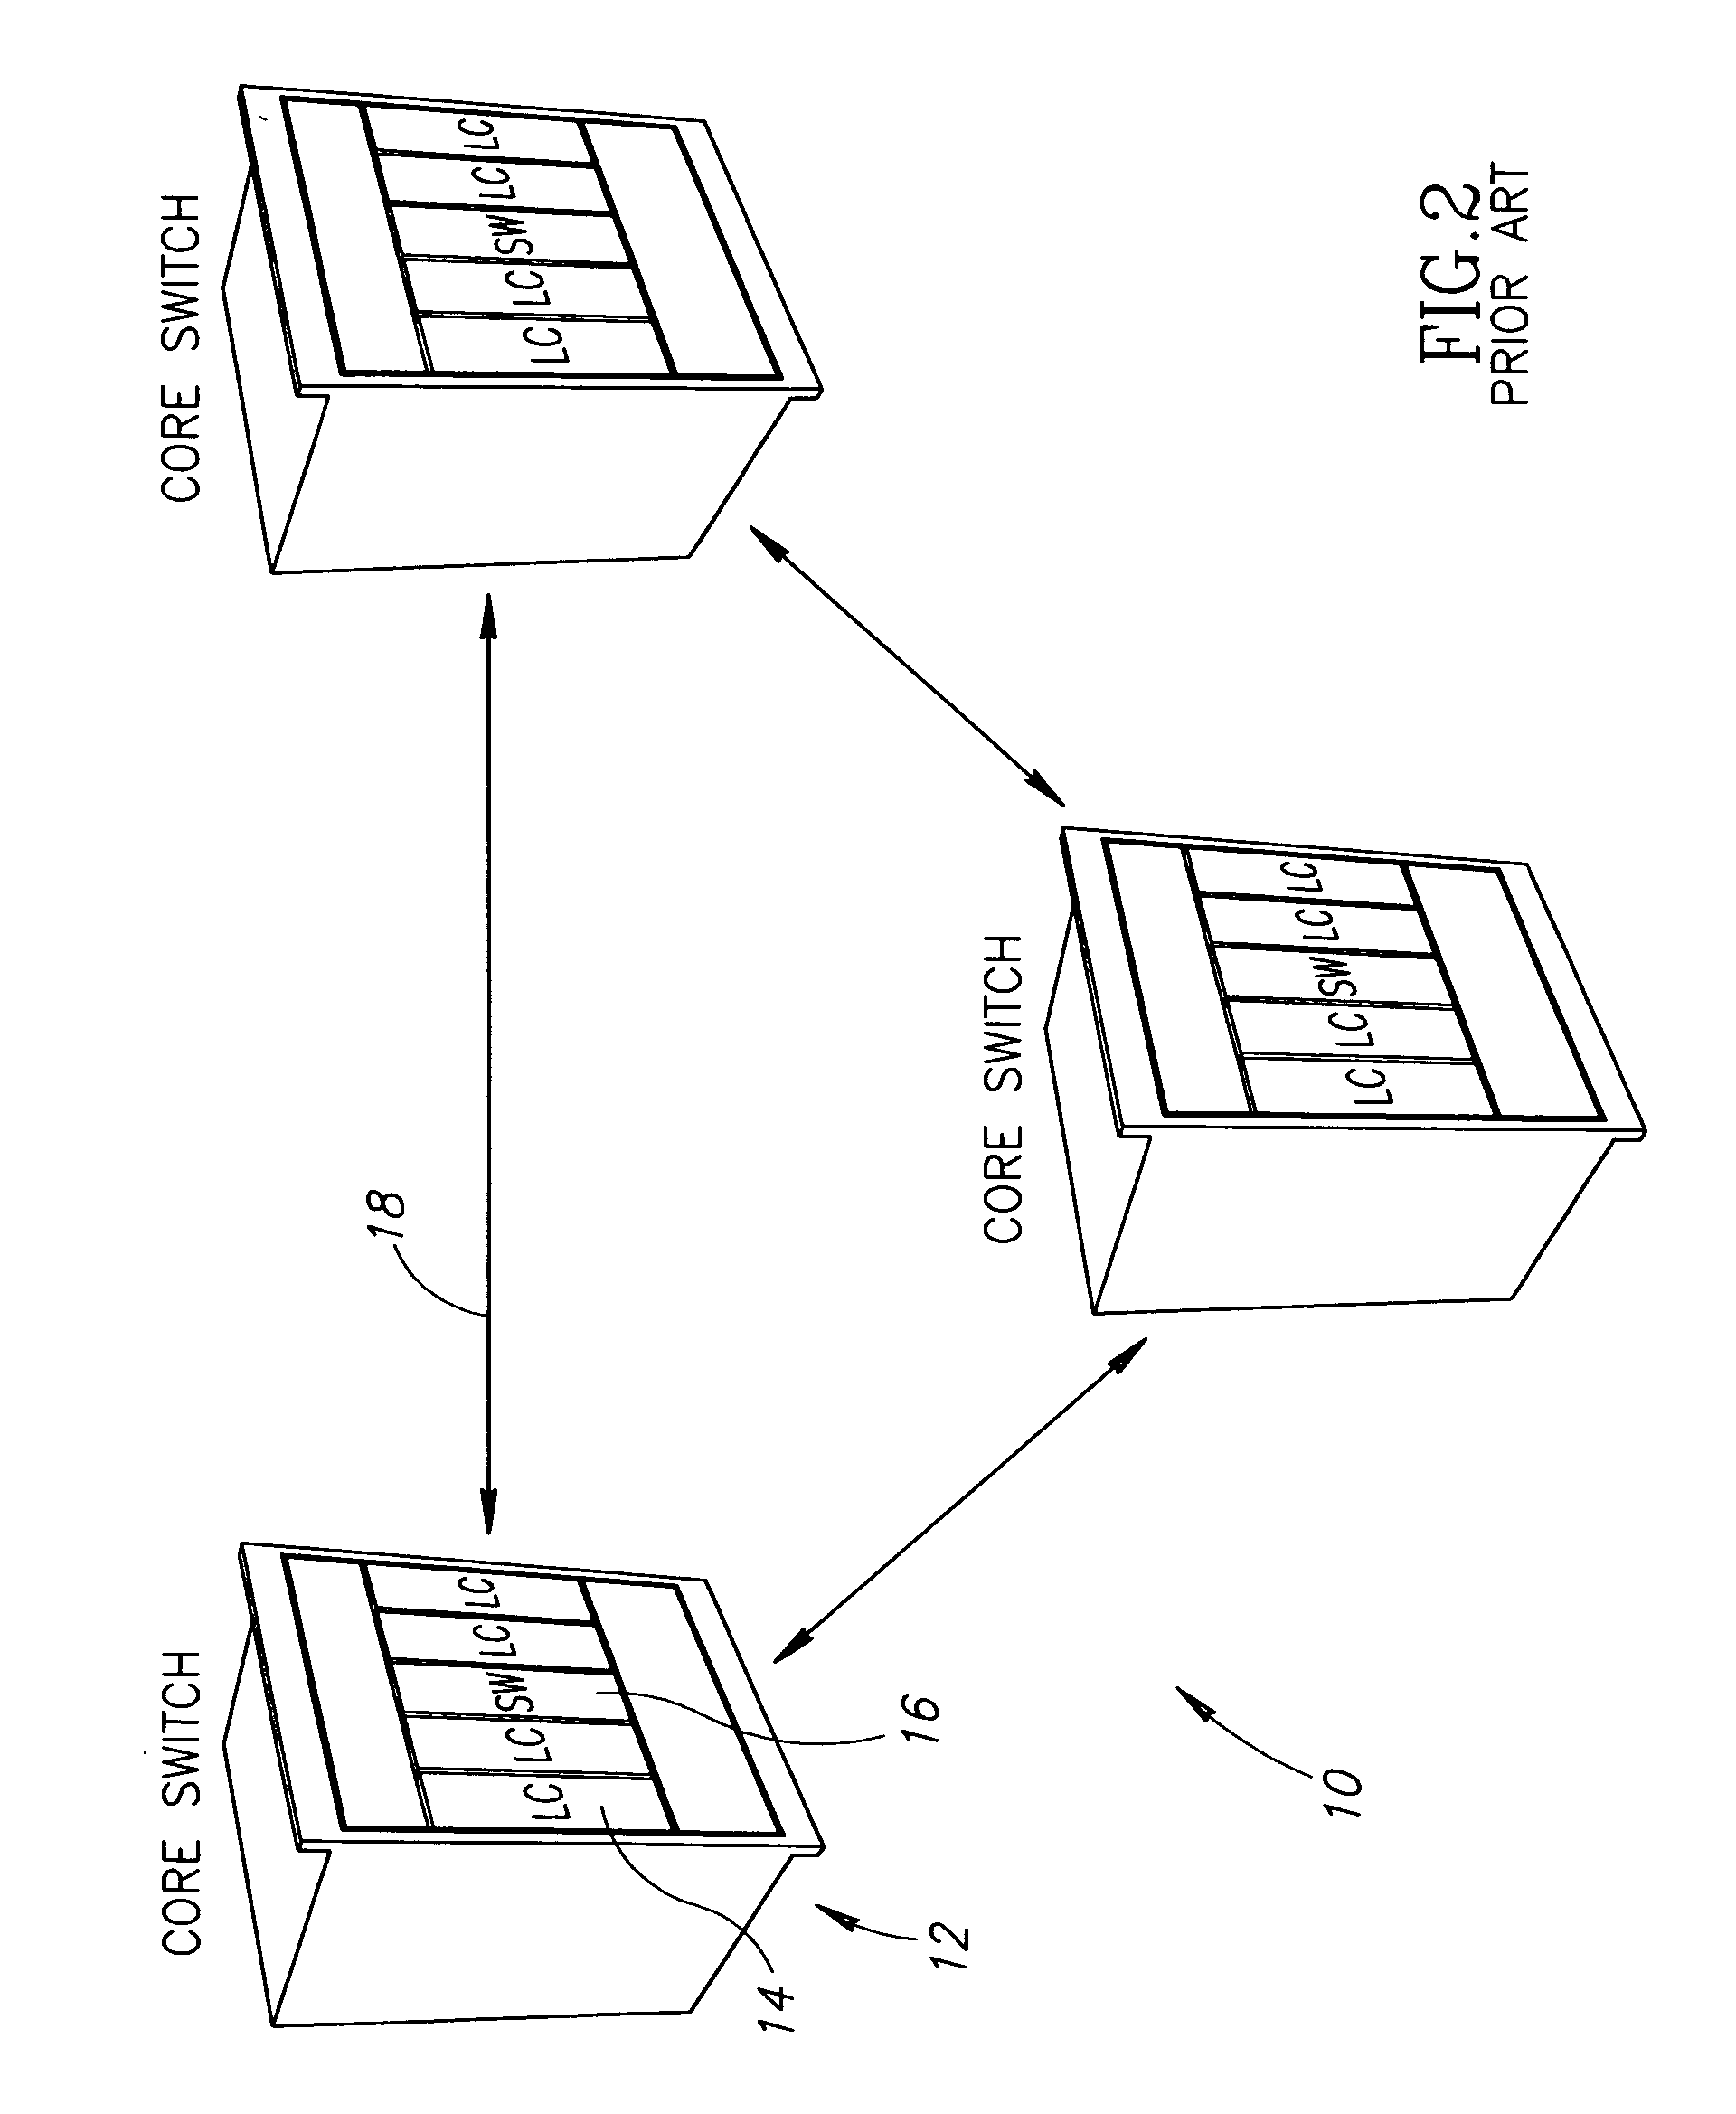 Apparatus for and method of support for committed over excess traffic in a distributed queuing system